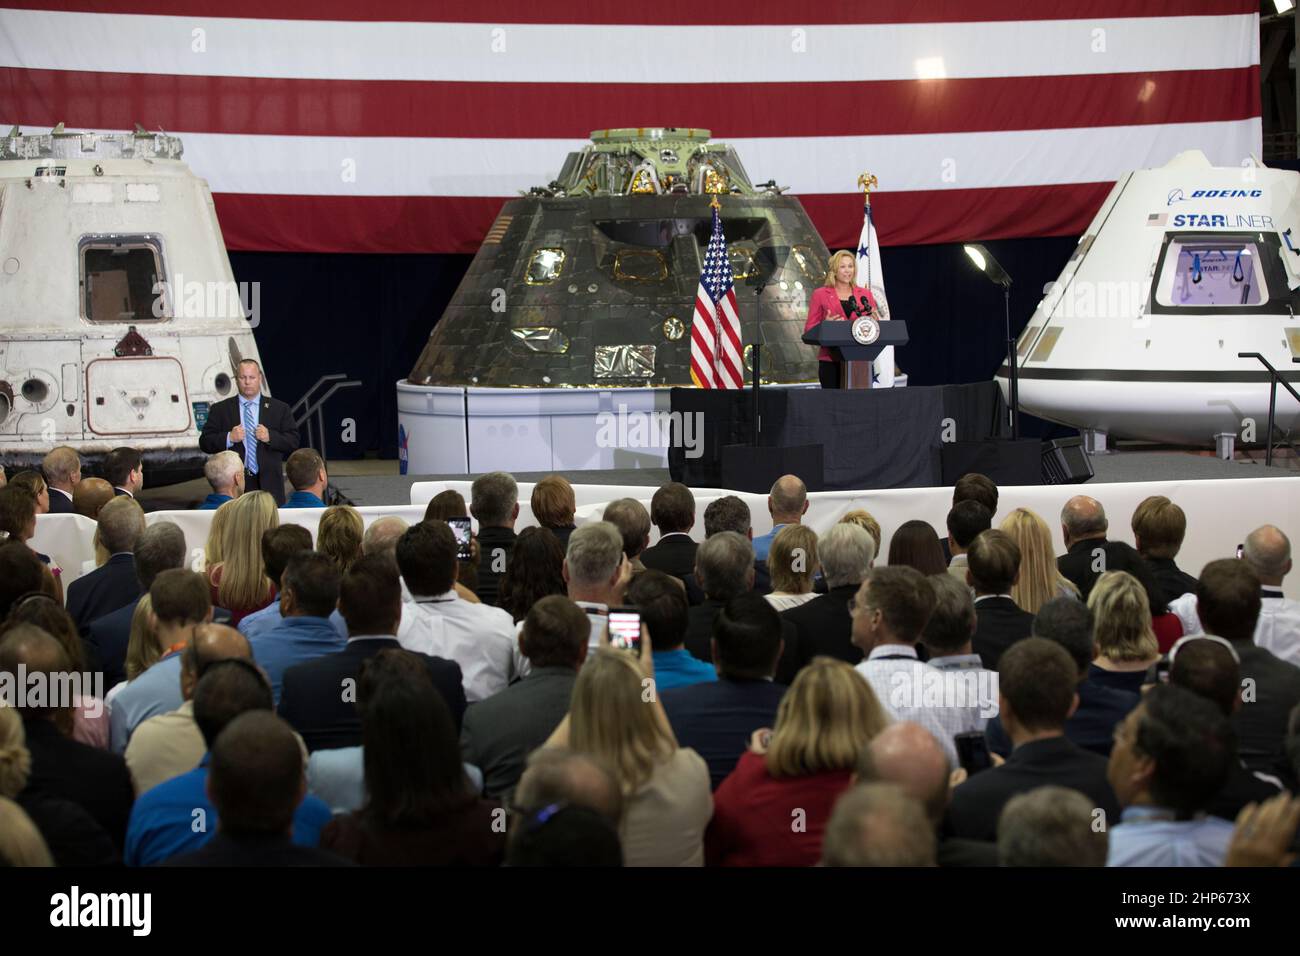 NASA Kennedy Space Center Deputy Director Janet Petro addresses agency leaders, U.S. and Florida government officials and employees inside the Vehicle Assembly Building during a visit by Vice President Mike Pence. Pence thanked employees for advancing American leadership in space. Behind the podium are, from the left, a flown SpaceX Dragon capsule, the Orion spacecraft flown on Exploration Flight test-1 in 2014, and a mockup of Boeing's CST-100 Starliner Stock Photo